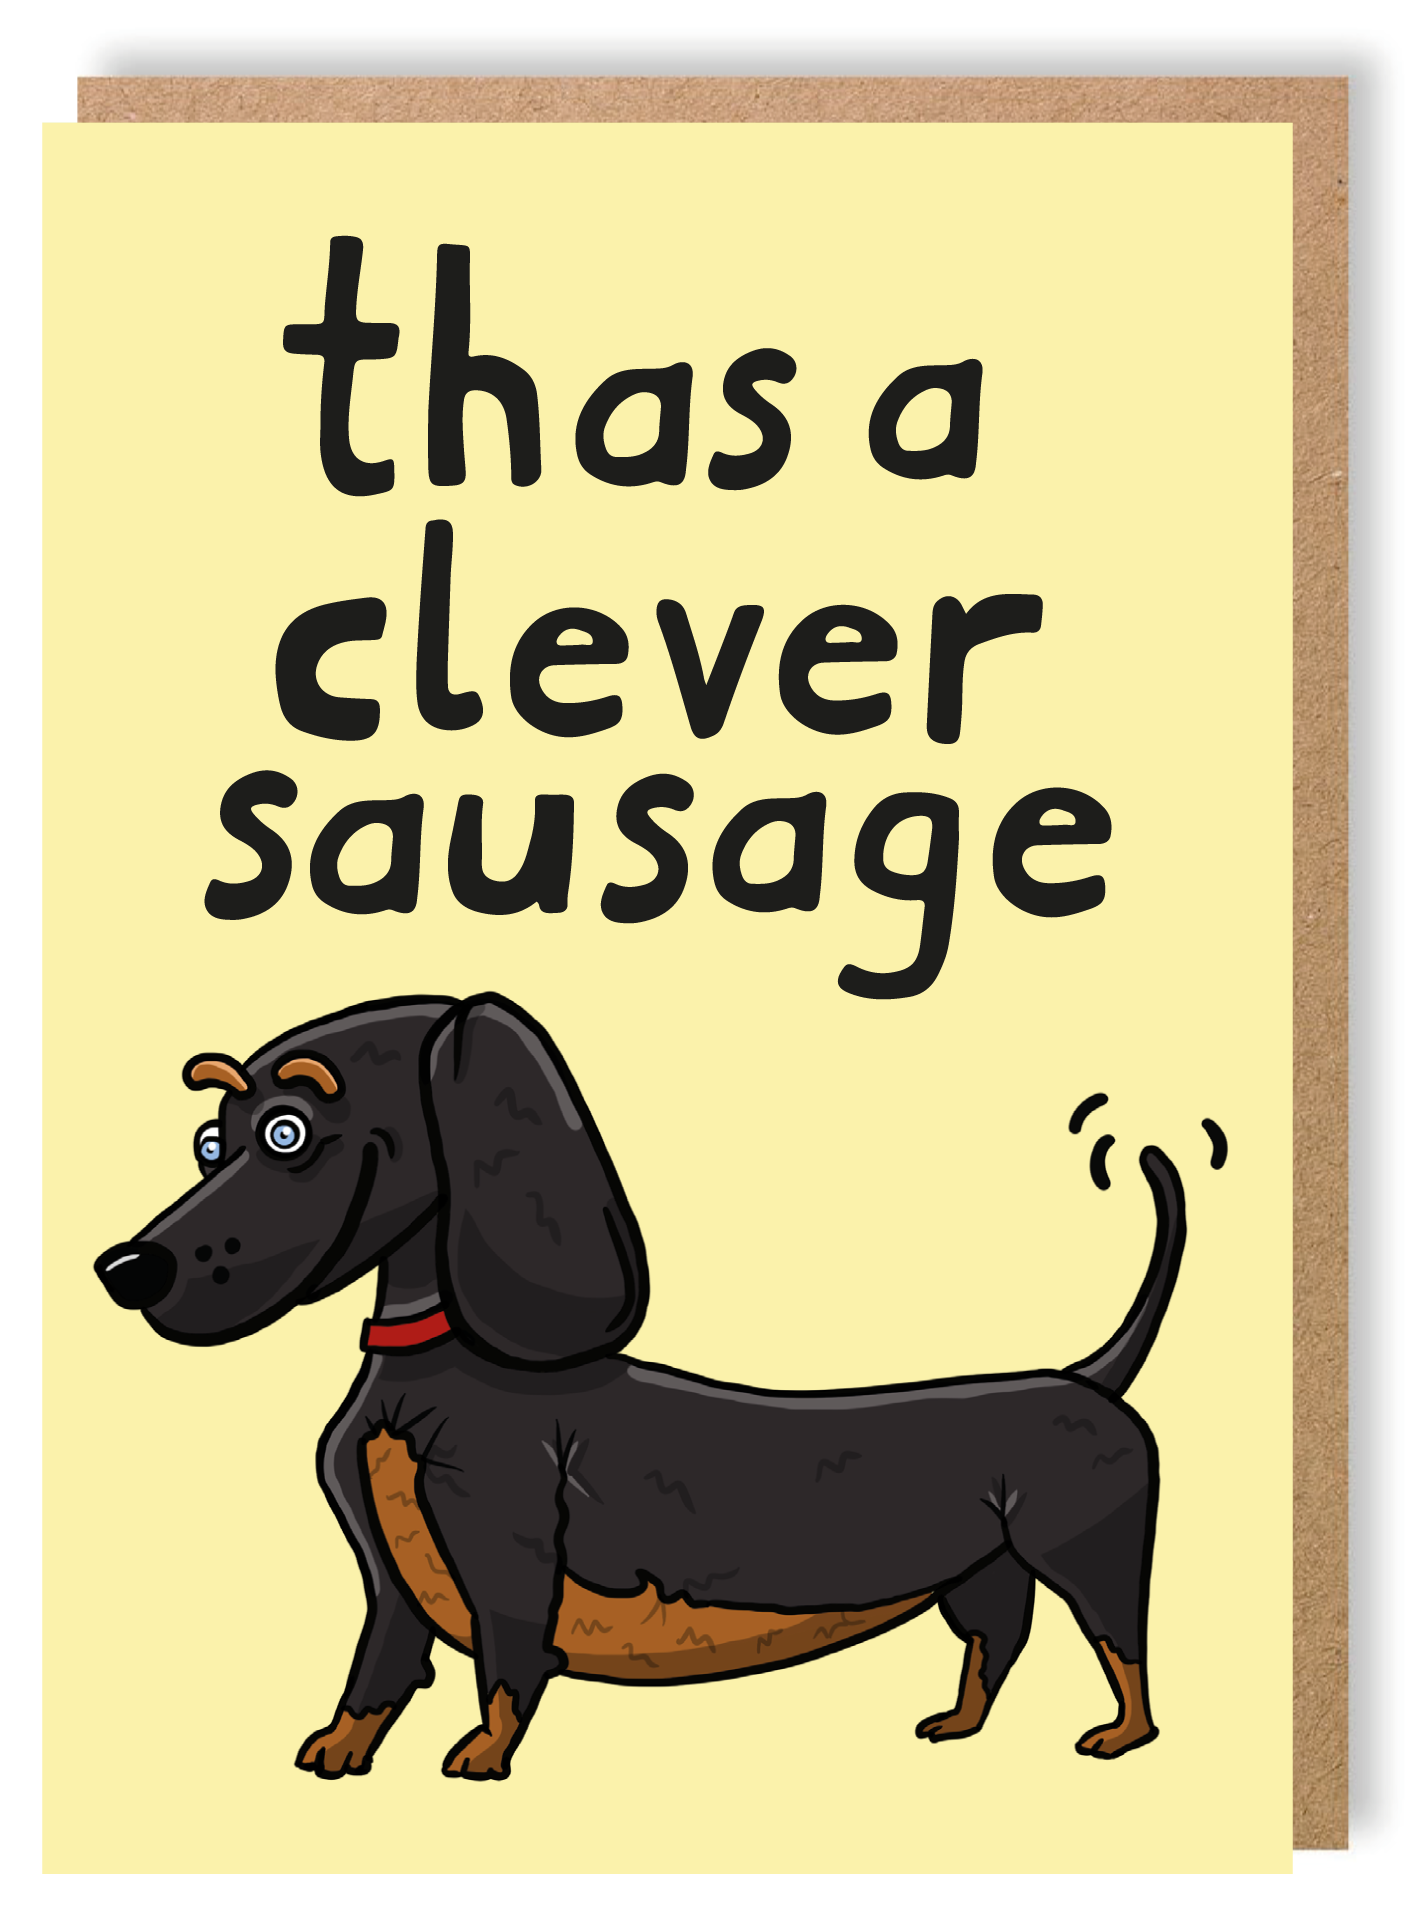 Thas A Clever Sausage - Greetings Card - LukeHorton Art